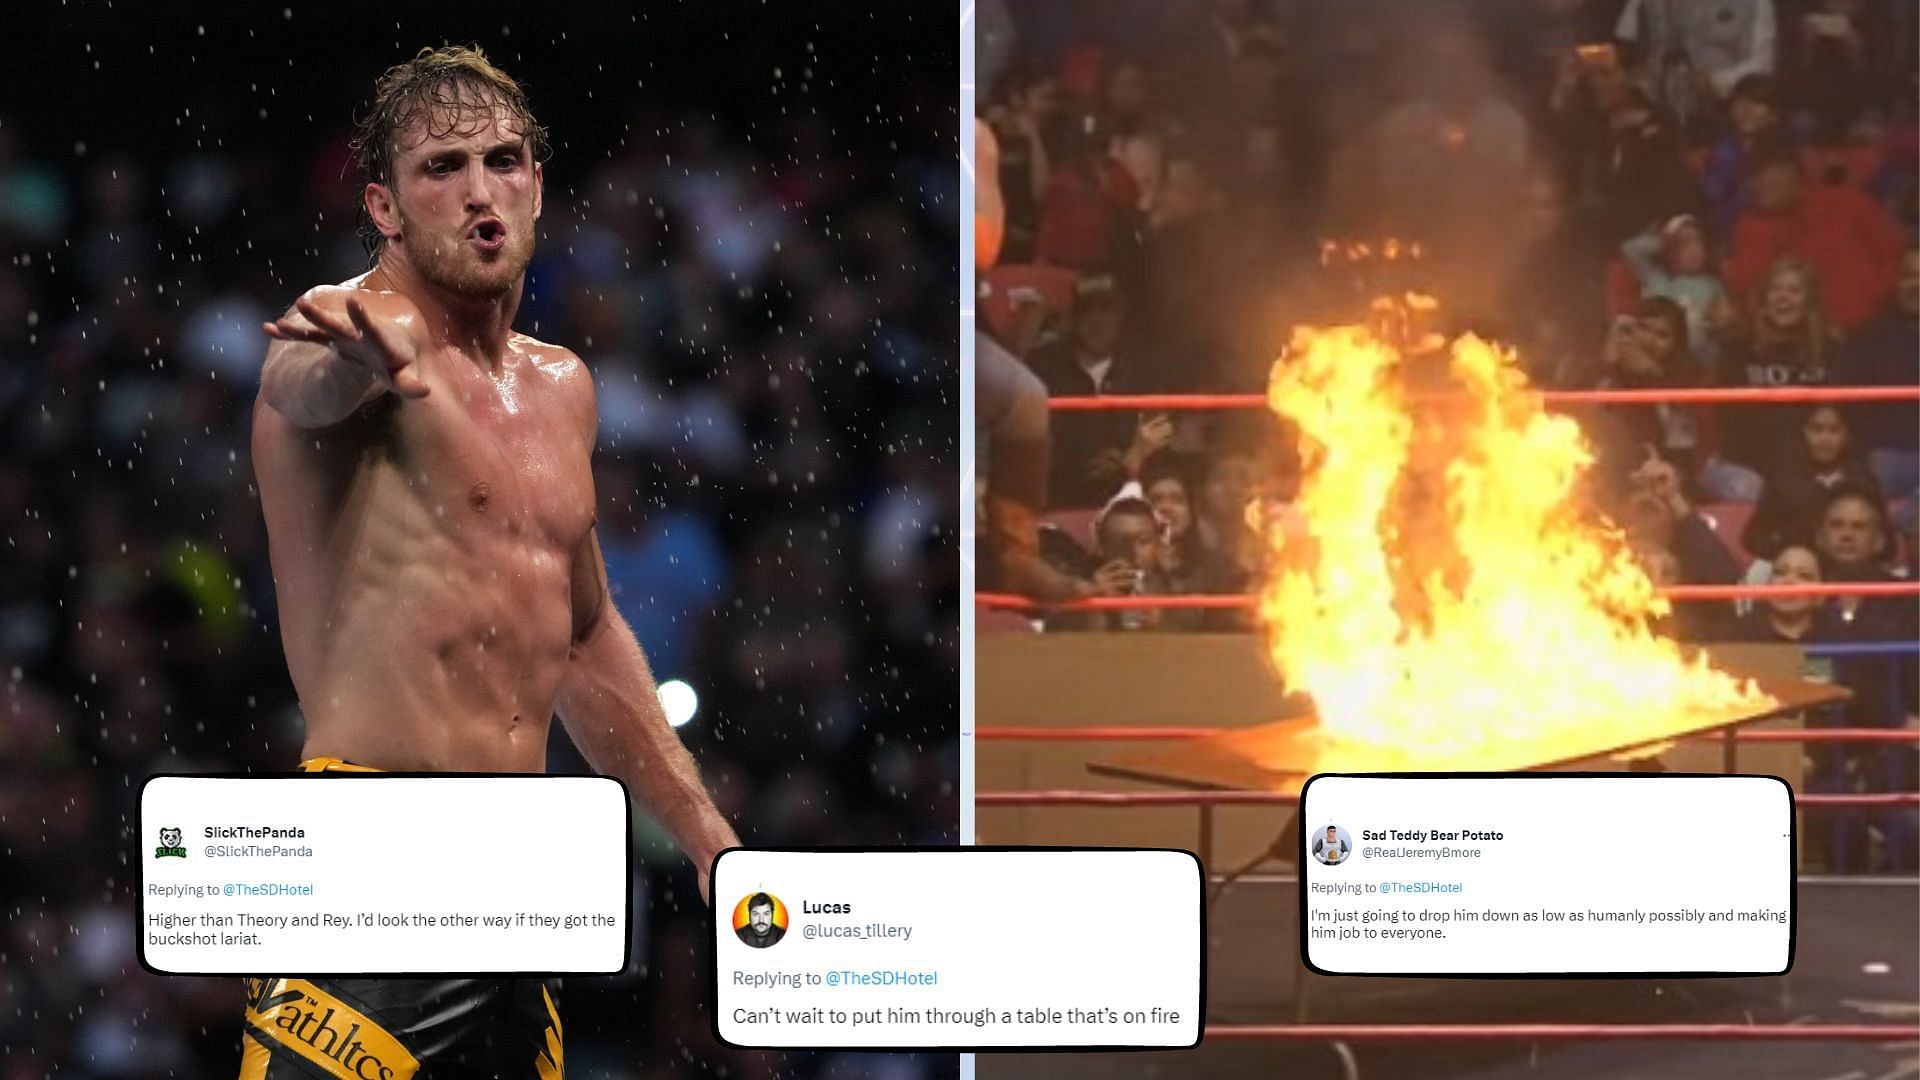 Logan Paul has caused some outrage on Twitter yet again